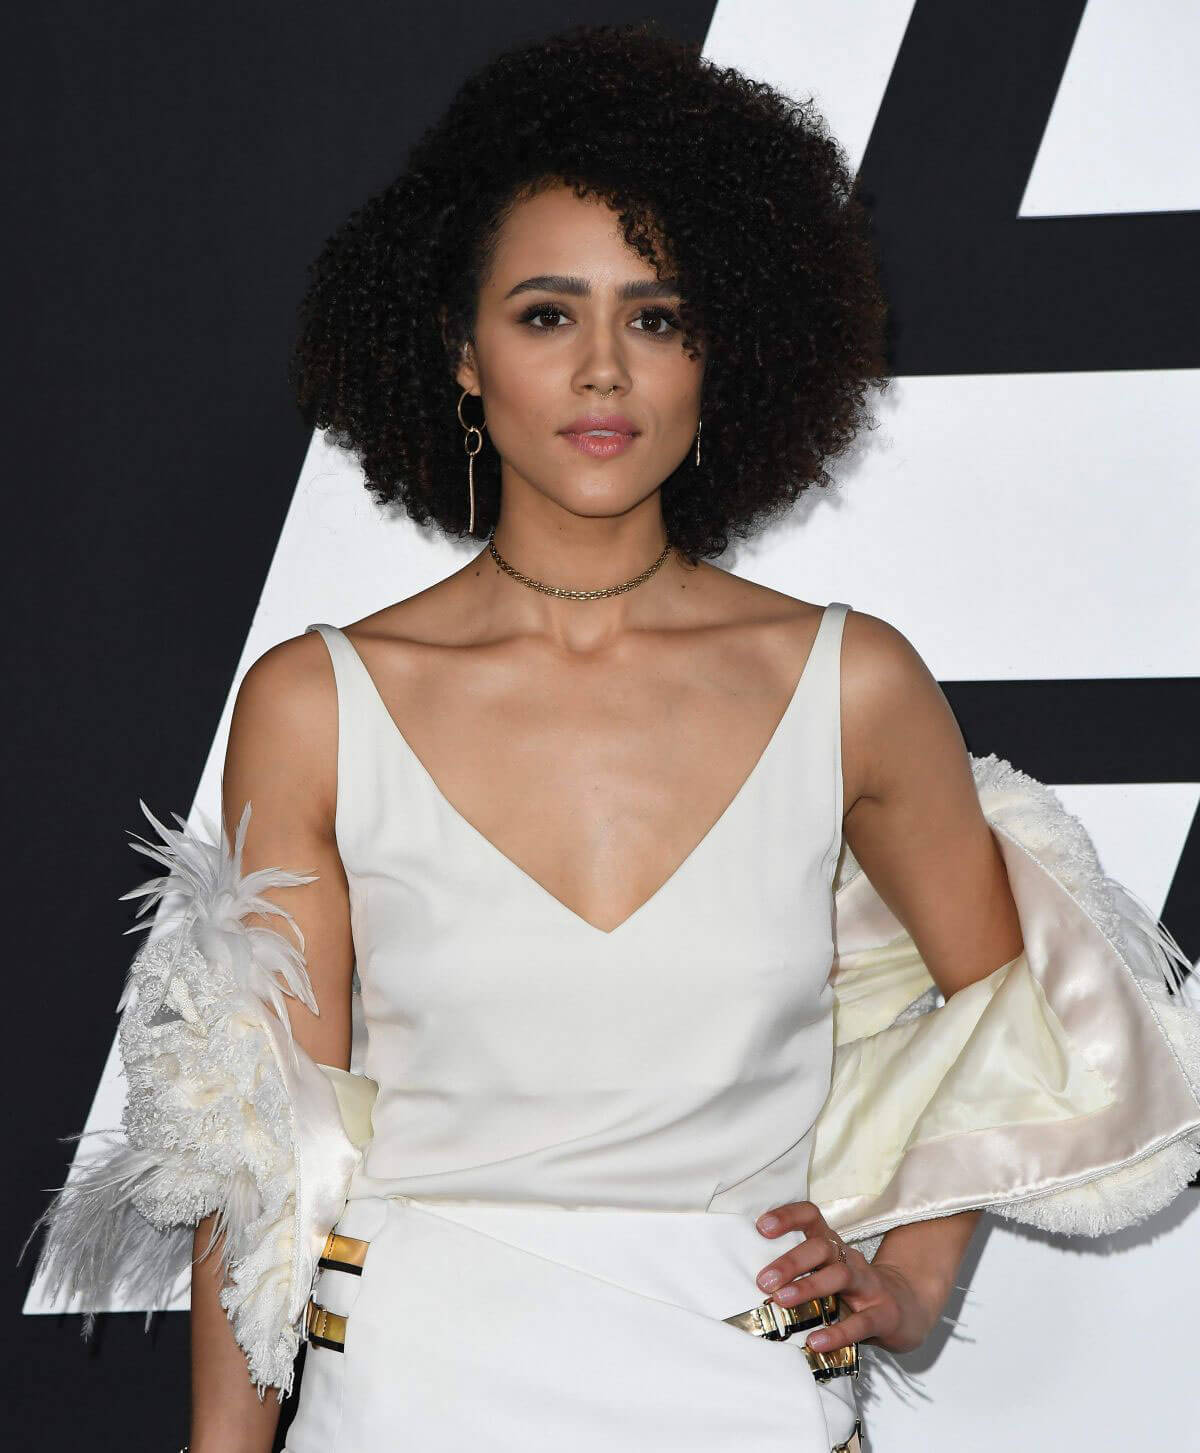 Nathalie Emmanuel Stills at The Fate of the Furious Premiere in New York